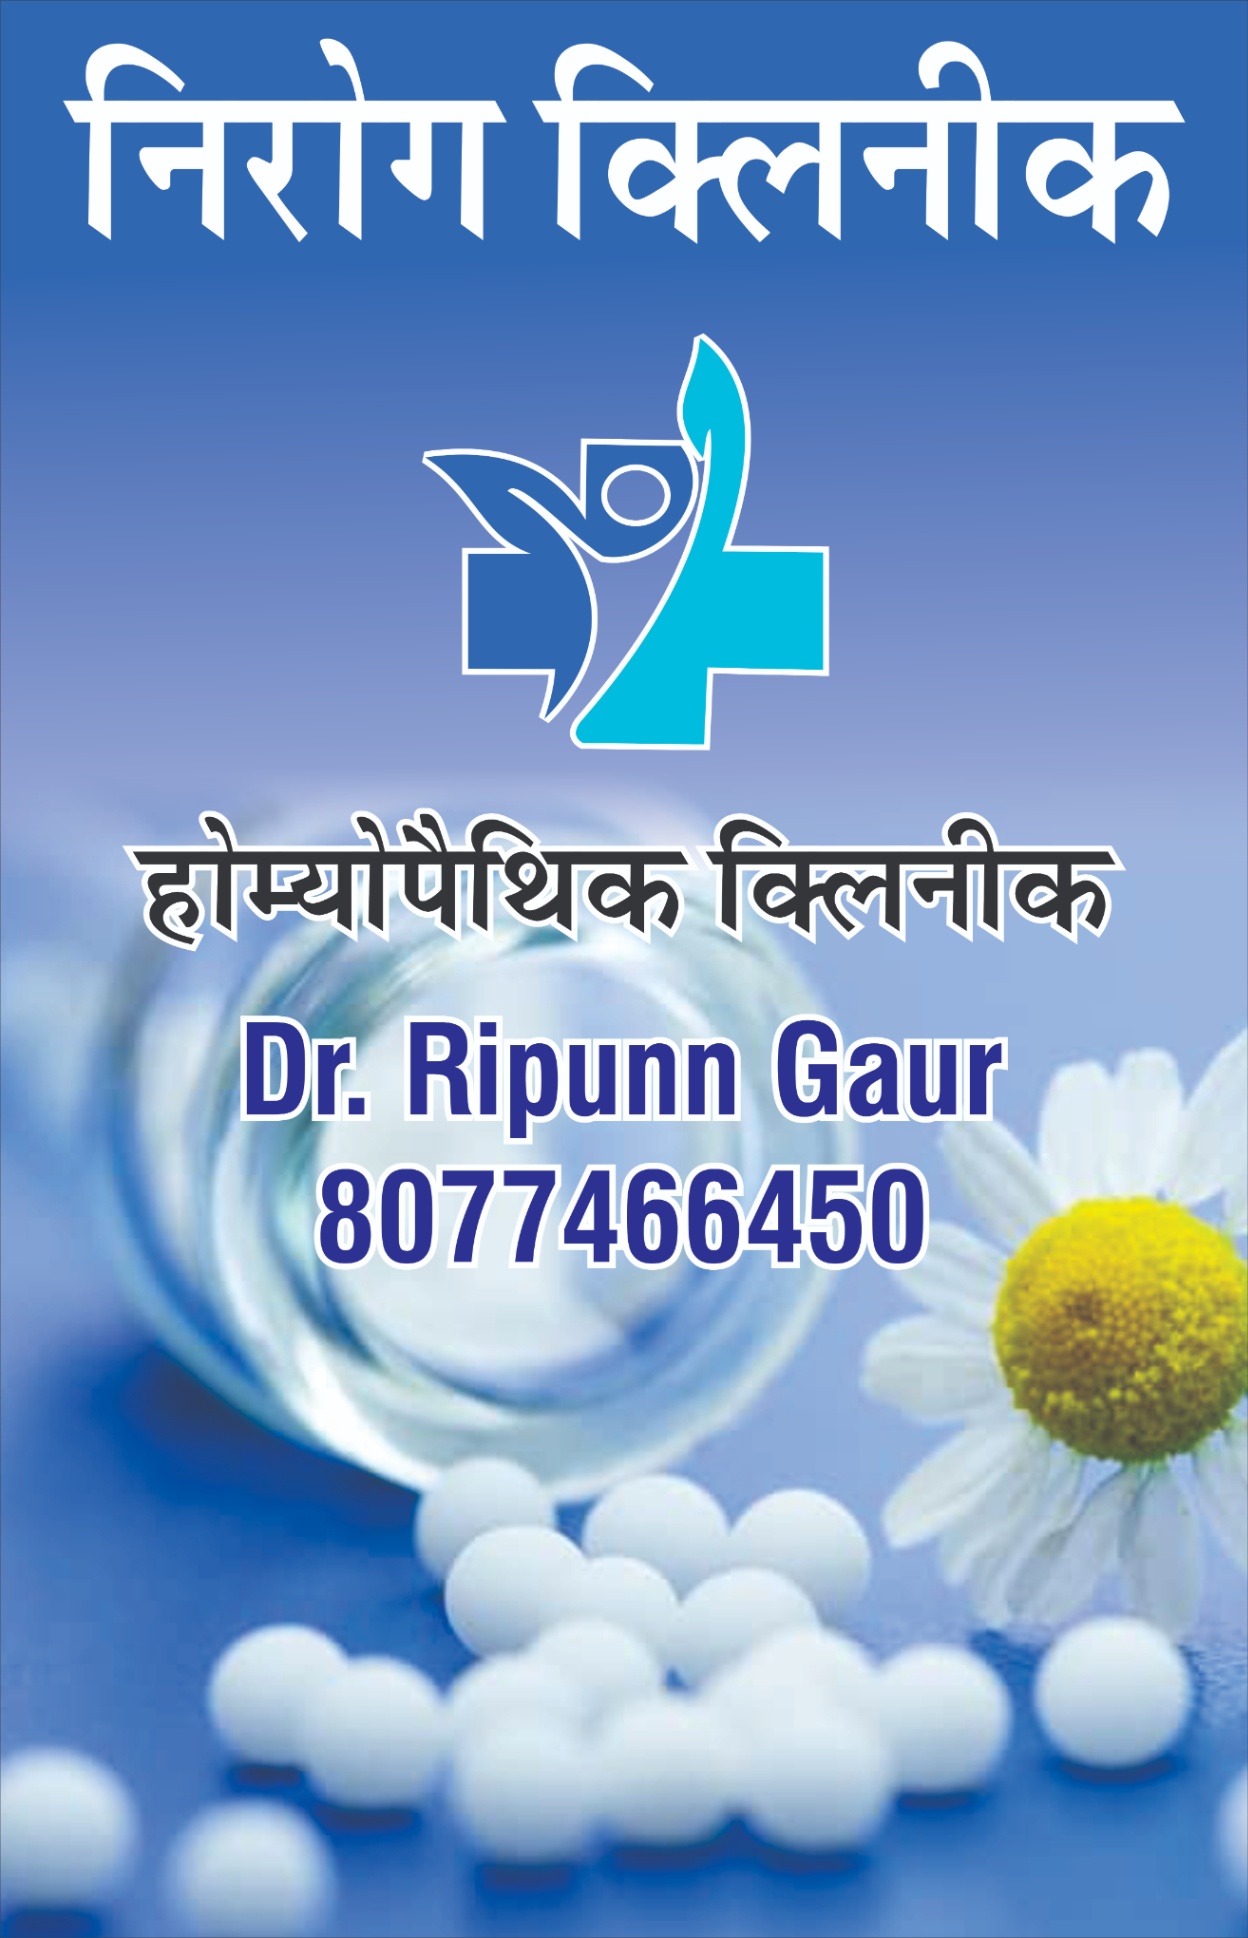 Homeopathic, Alternative Therapy/ Medicine, Doctors; Exp: More than 10 year